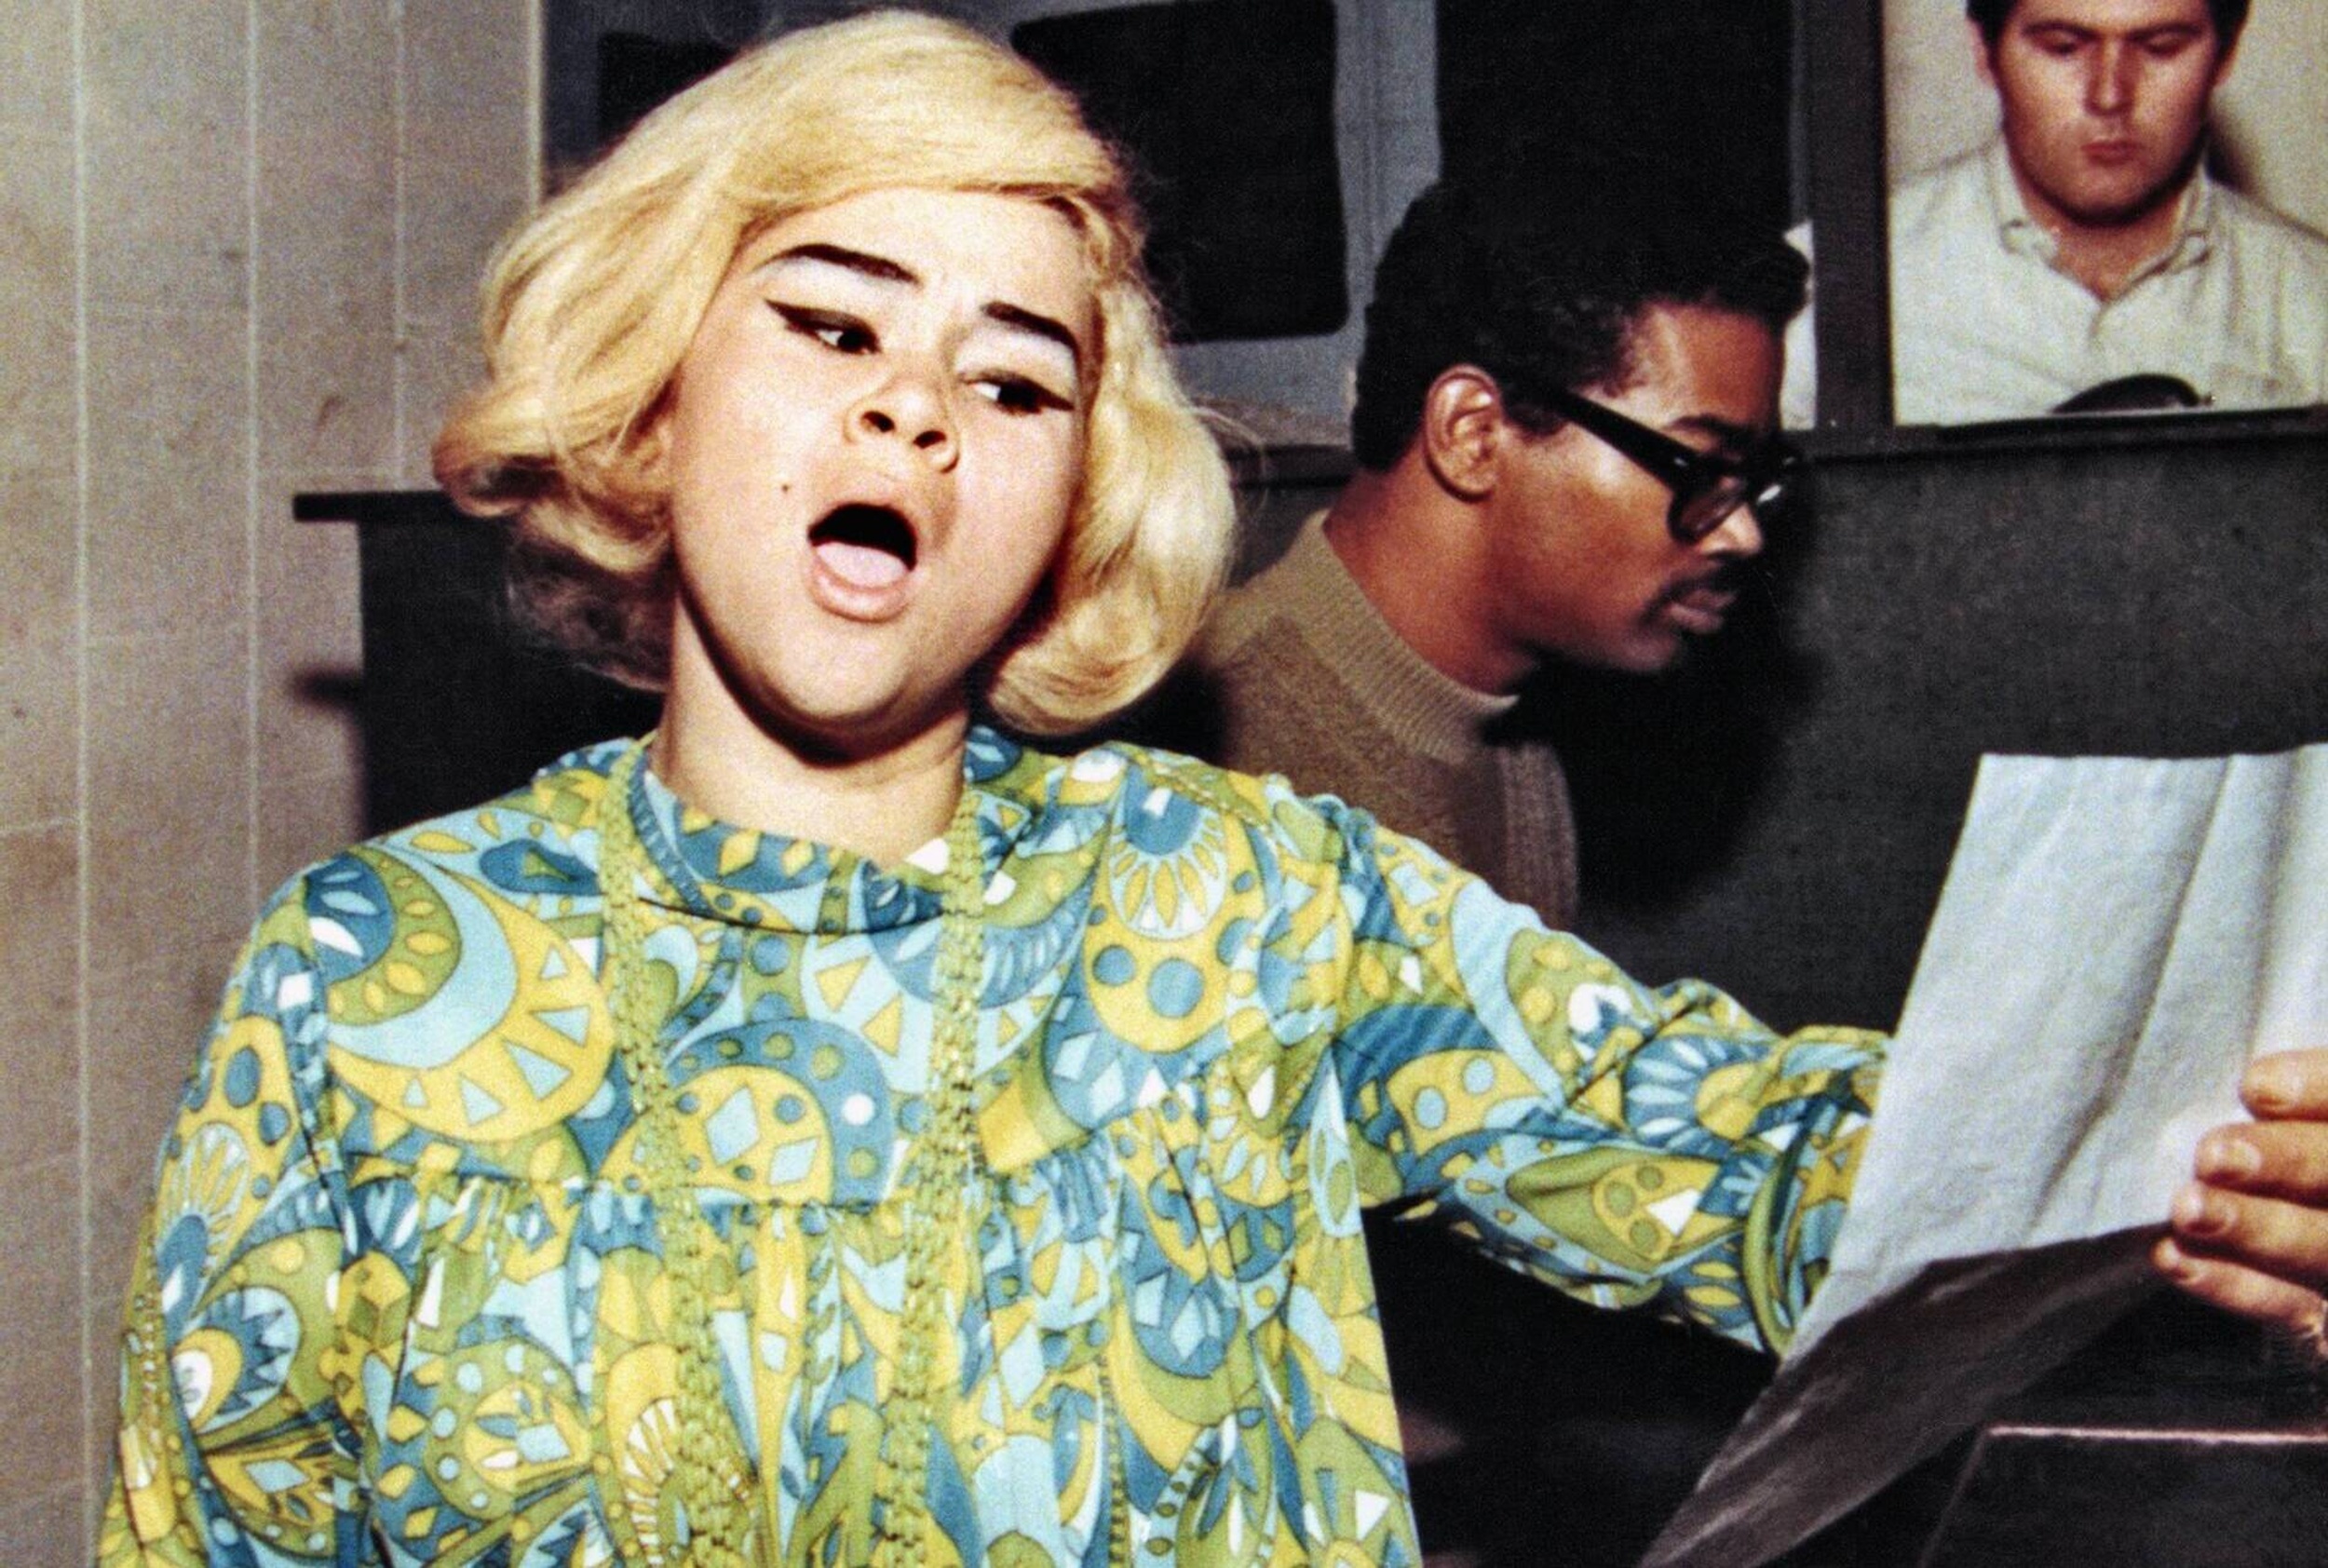 <p>Jazz legend Etta James finds her forever love on her 1961 single <a href="https://www.youtube.com/watch?v=1qJU8G7gR_g" rel="noopener noreferrer">“At Last.”</a> On the track, she gives feelings of how she’s waited so patiently for love and now she’s feeling pure bliss. She opens the song with, “At last / My love has come along / My lonely days are over / And life is like a song.” </p><p>You may also like: <a href='https://www.yardbarker.com/entertainment/articles/20_iconic_all_female_collaborations_120523/s1__39431656'>20 iconic all-female collaborations</a></p>